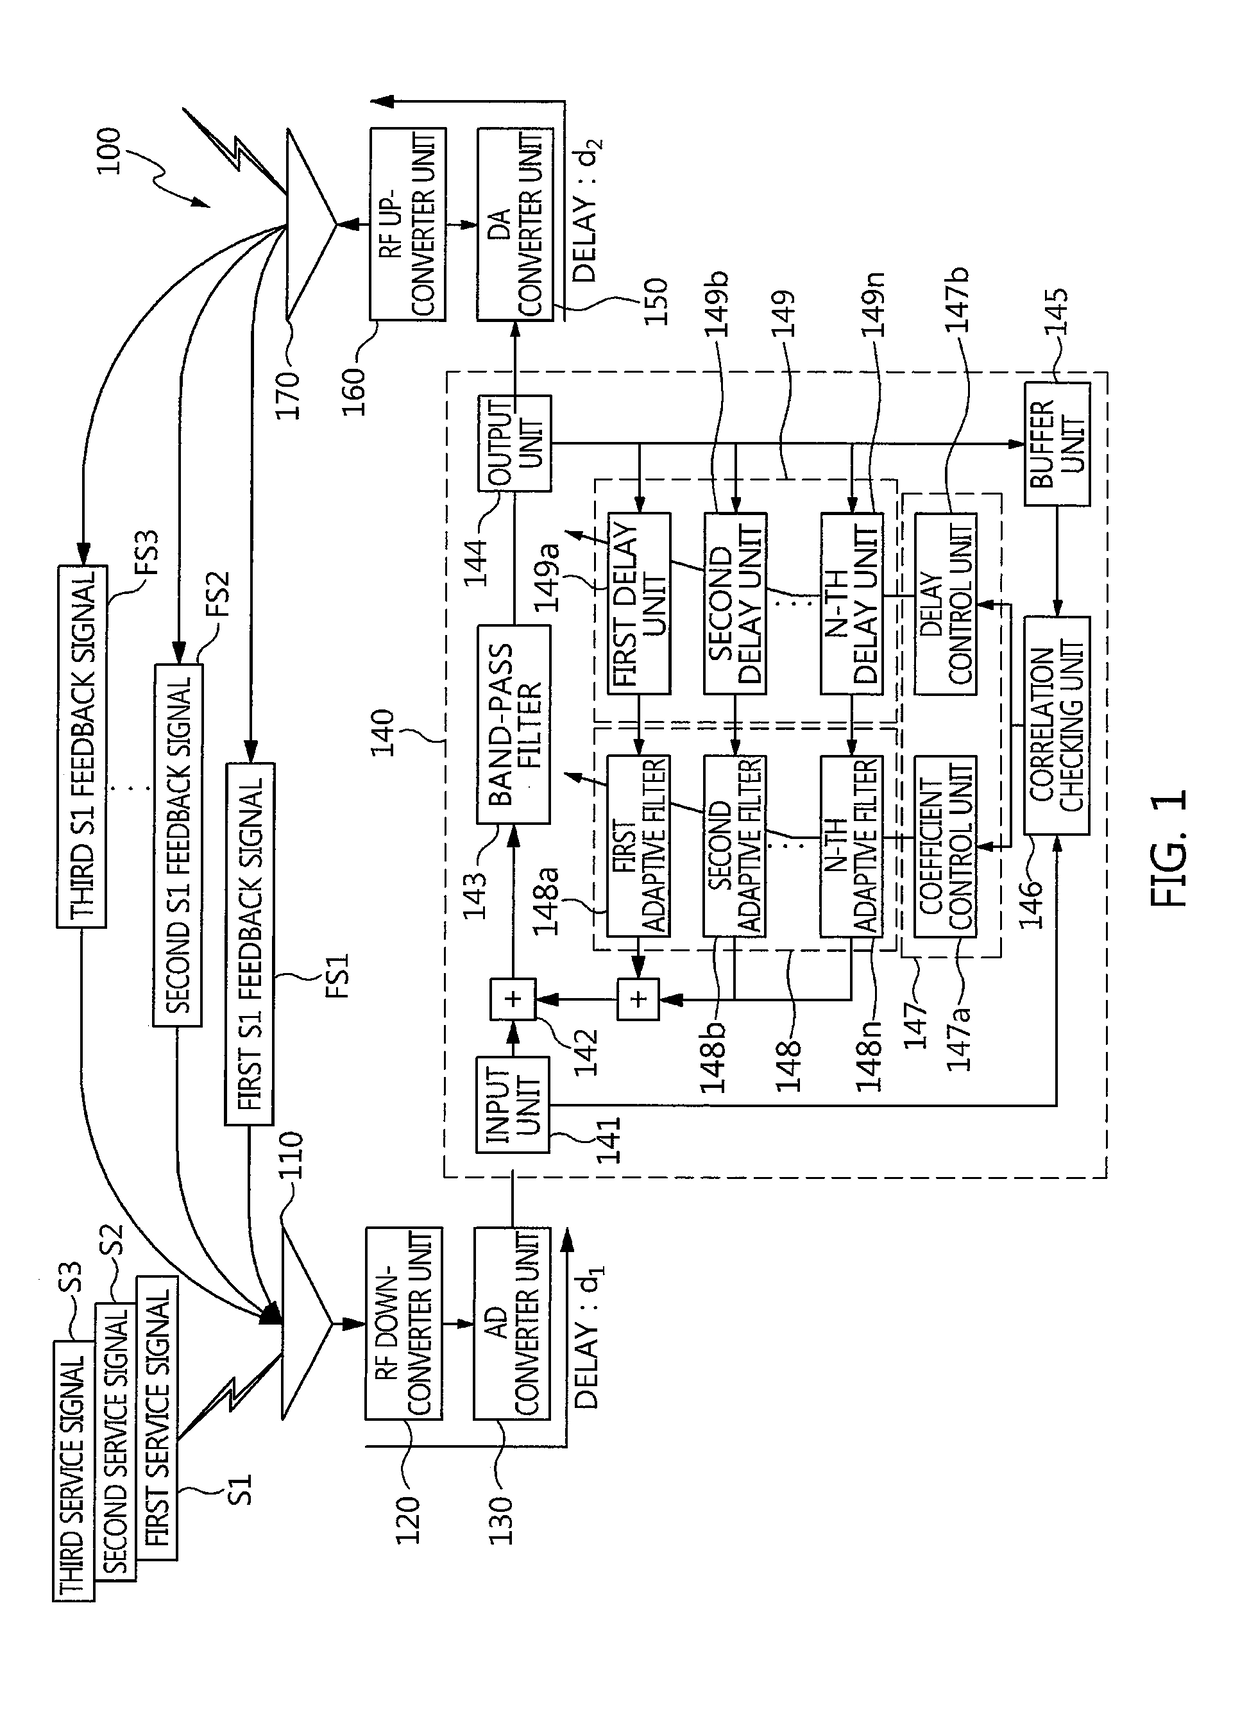 Interference cancellation repeater and repeating method